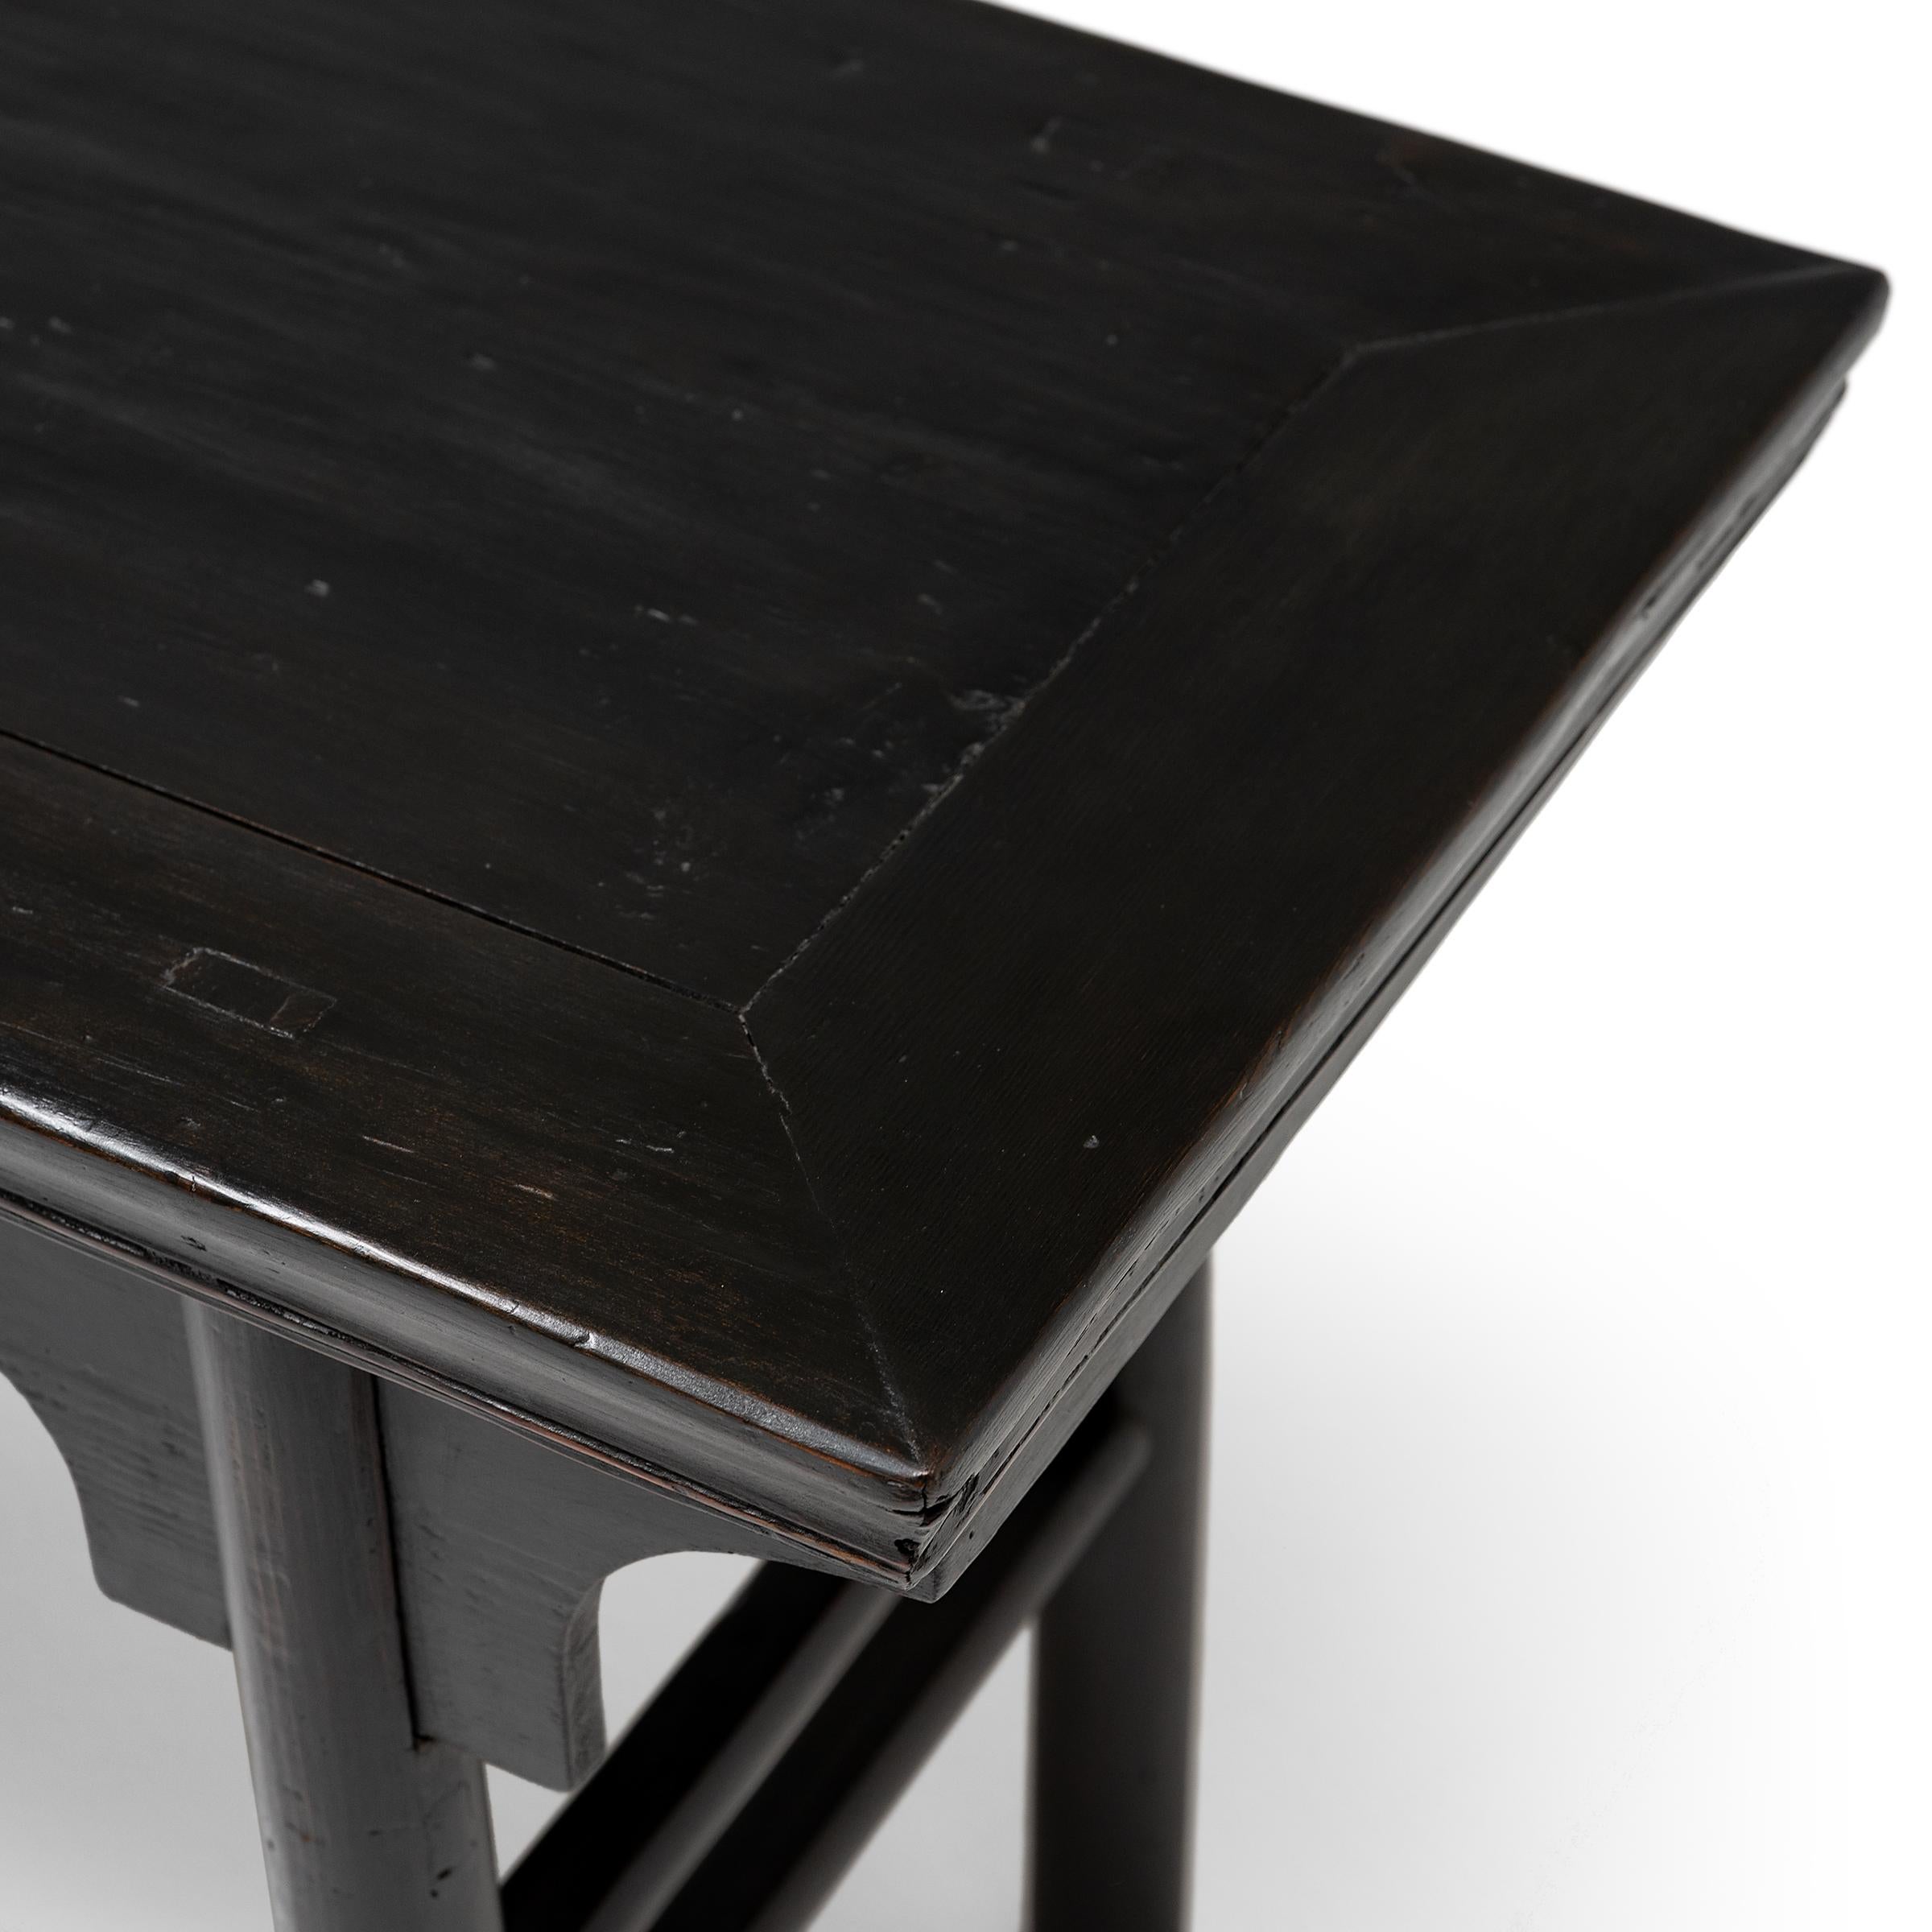 20th Century Chinese Black Lacquer Wine Table, c. 1900 For Sale